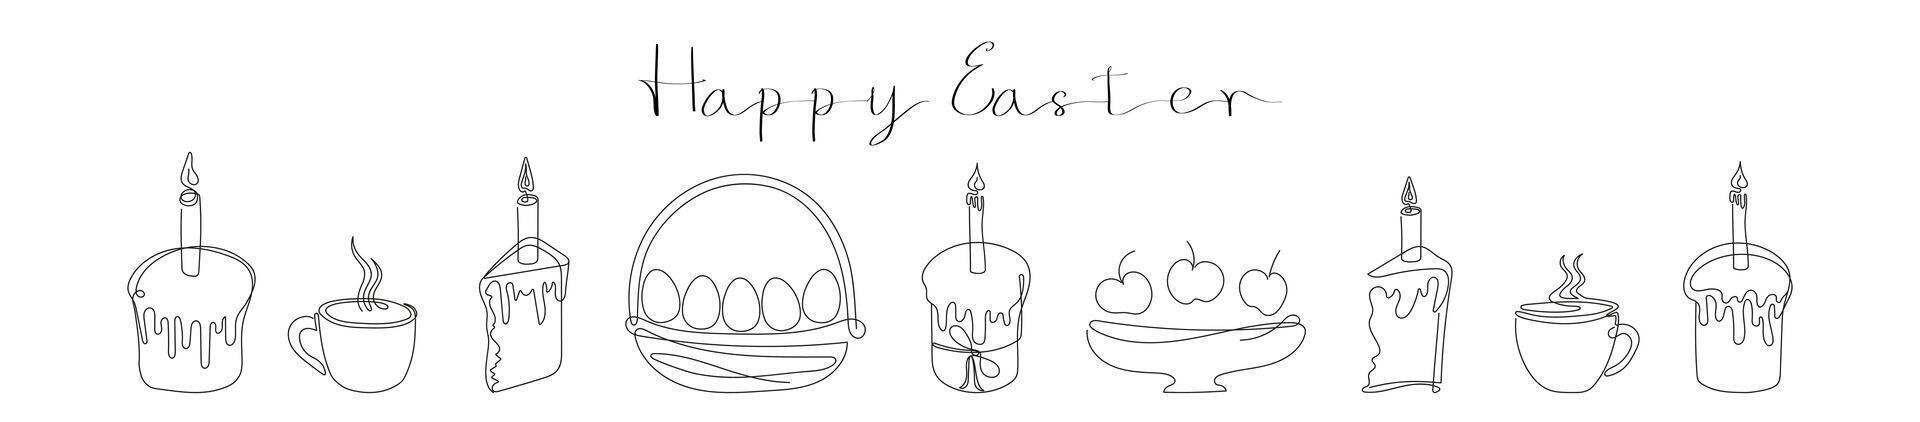 Easter Set in continuous one line style with design elements like Easter cakes with lit candles, wicker basket with painted eggs, steaming mugs. Happy Easter greeting. Festive food. Black and white. vector